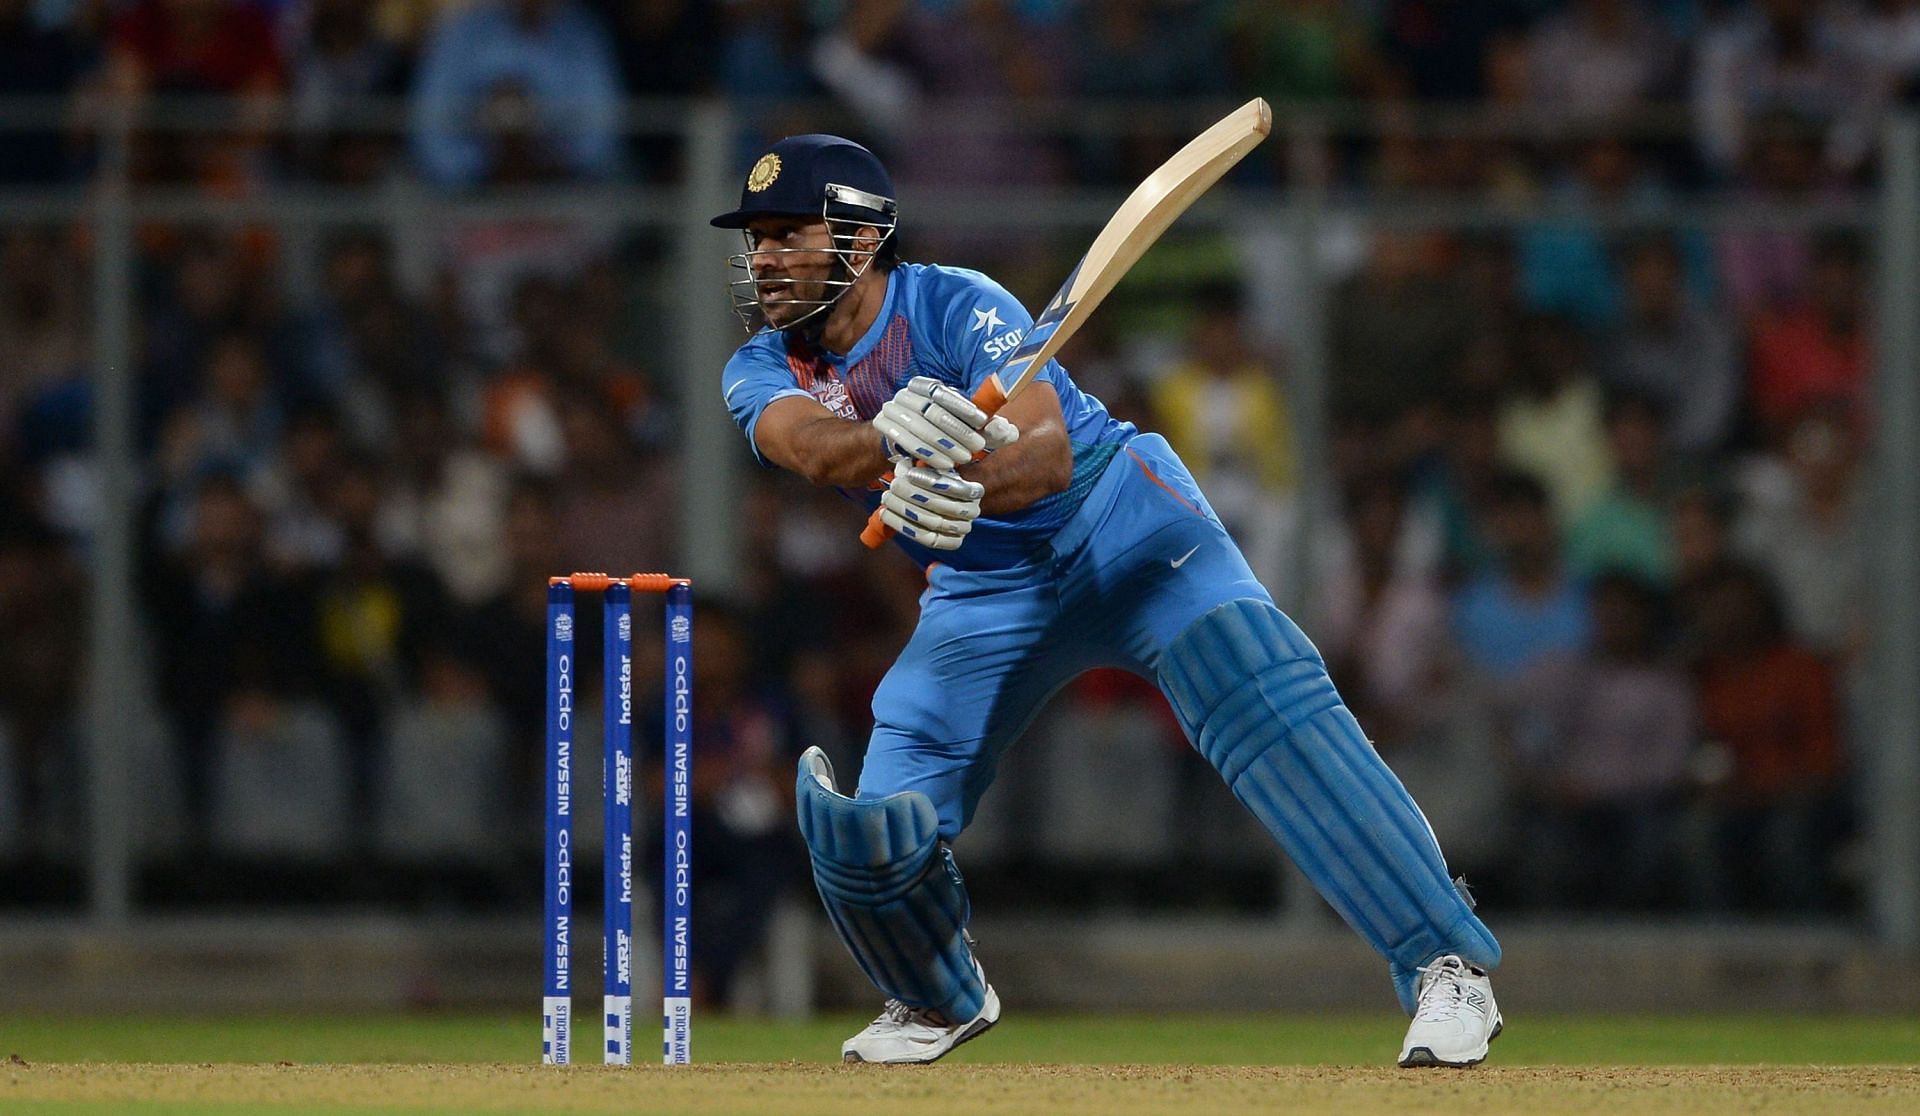 MS Dhoni played his last T20 World Cup match in 2016 against the West Indies